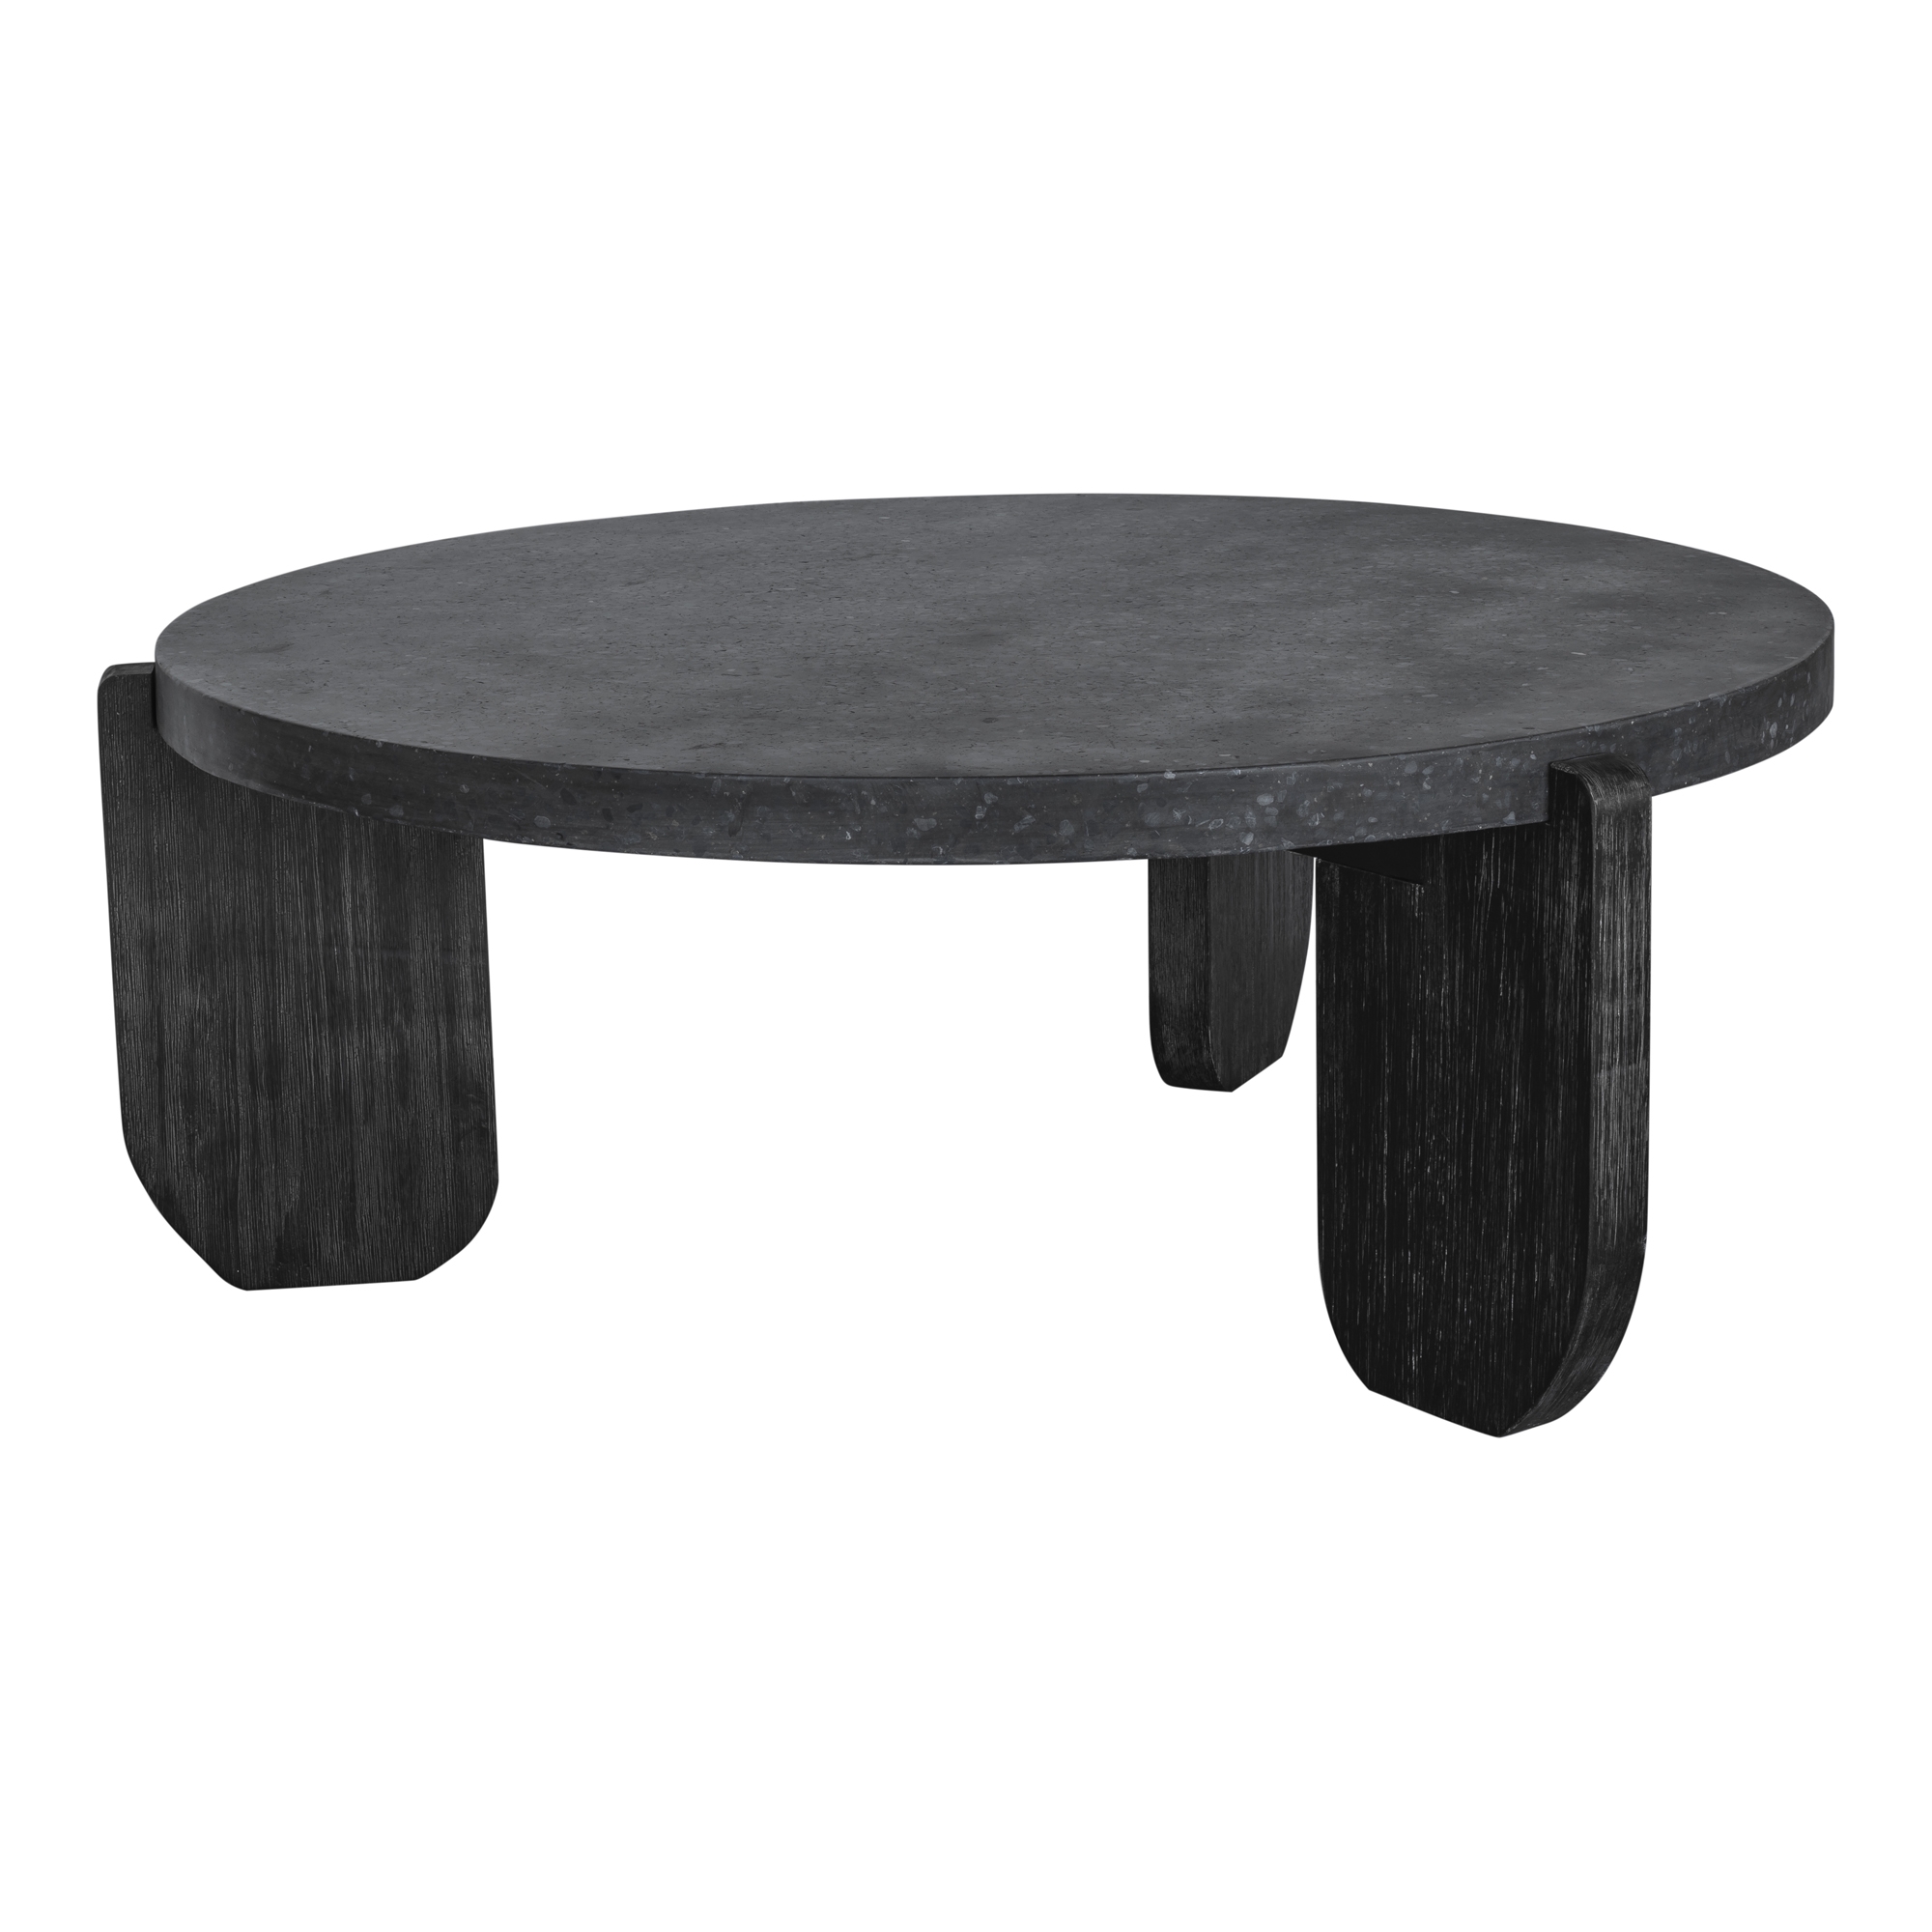 WUNDER COFFEE TABLE - Image 1